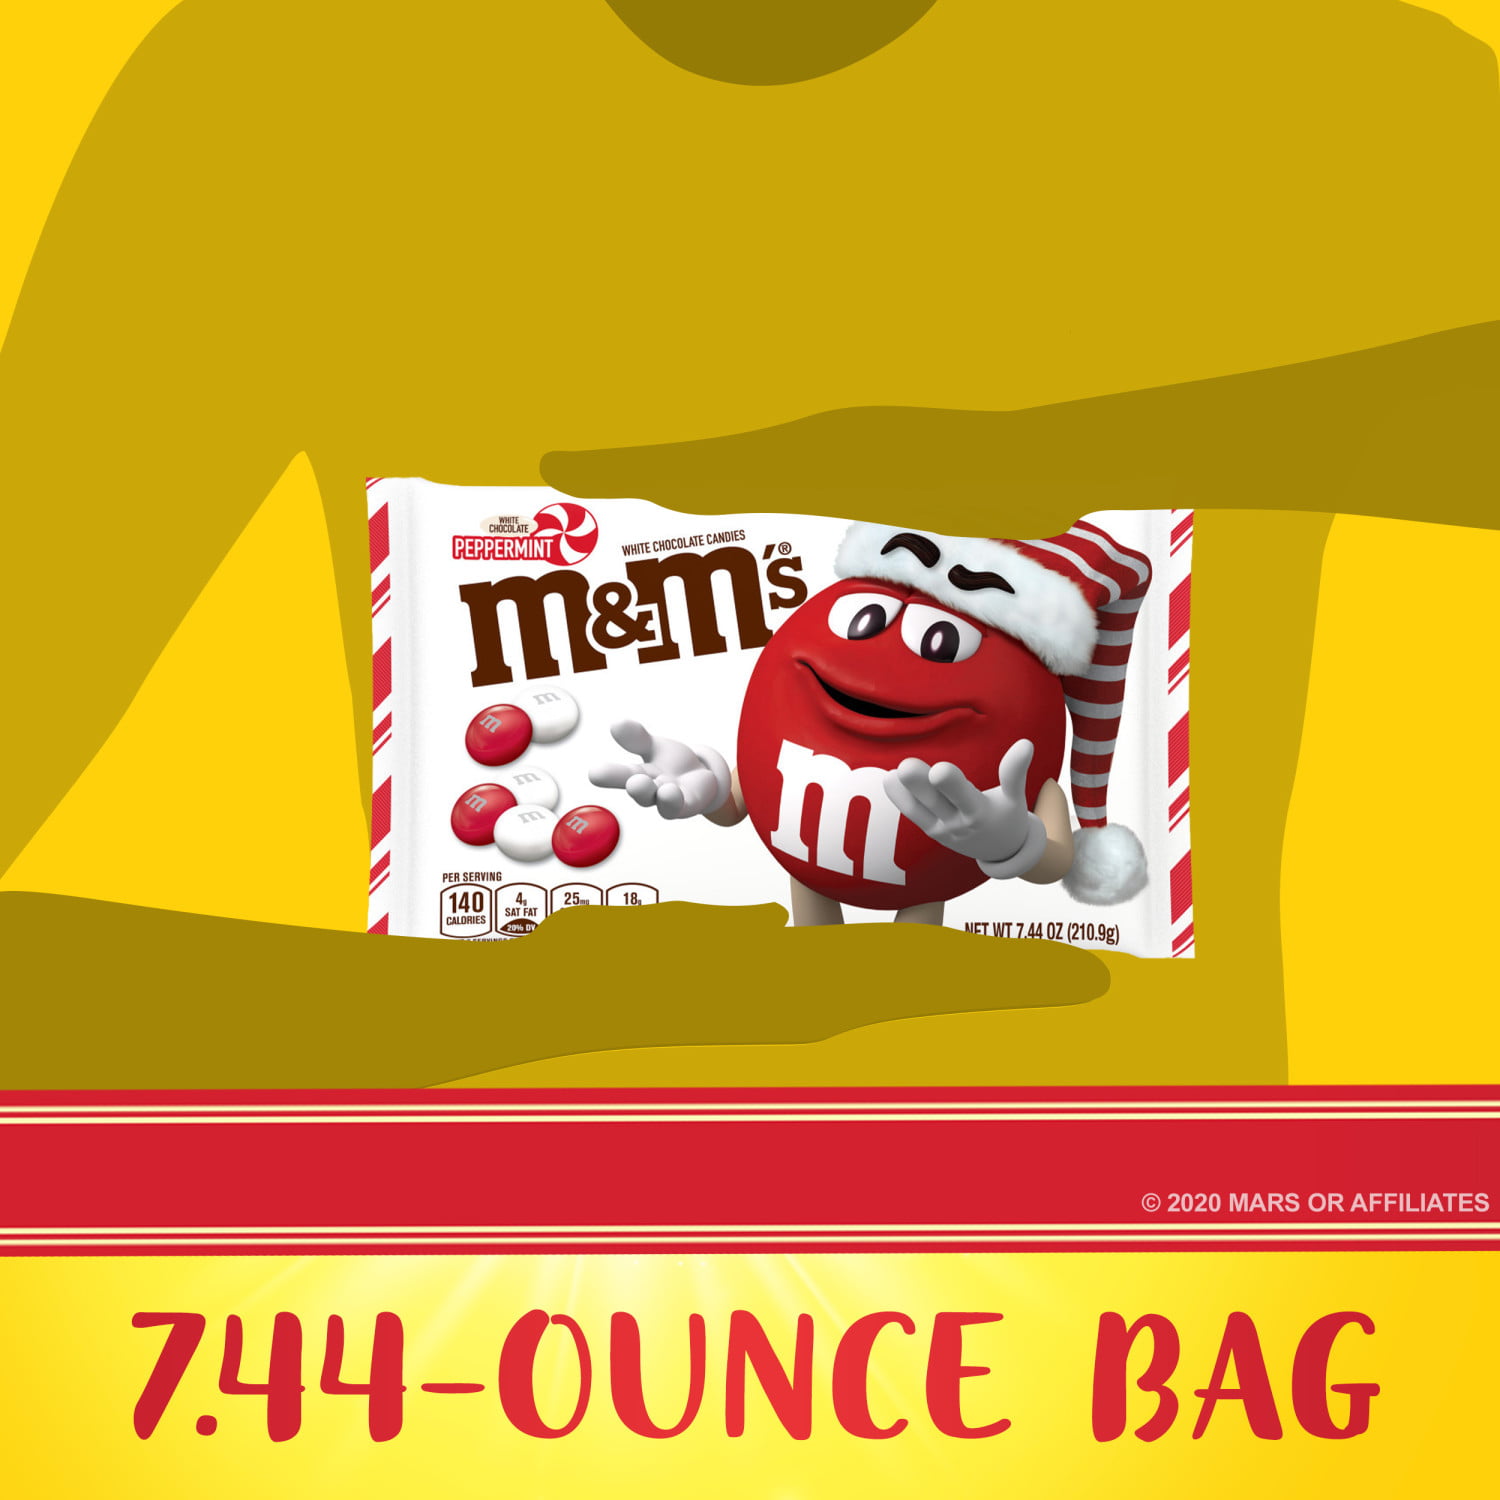 REVIEW: White Chocolate Peppermint M&M's - The Impulsive Buy